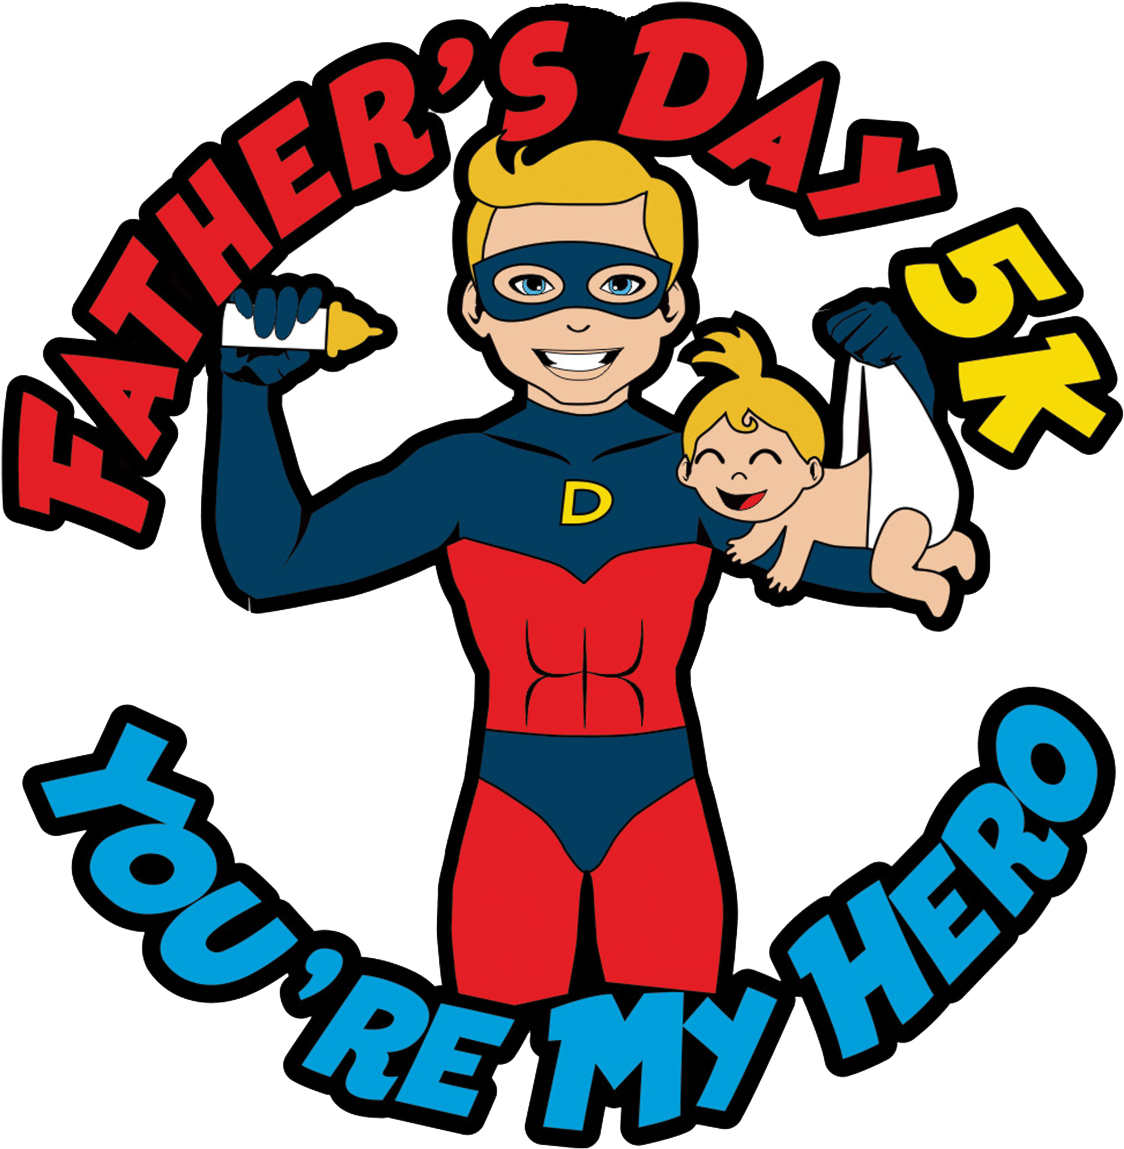 Father S Day 5k You Re My Hero Moonjoggers S Artist - Father S Day 5k You Re My Hero Moonjoggers S Artist (1200x1371)